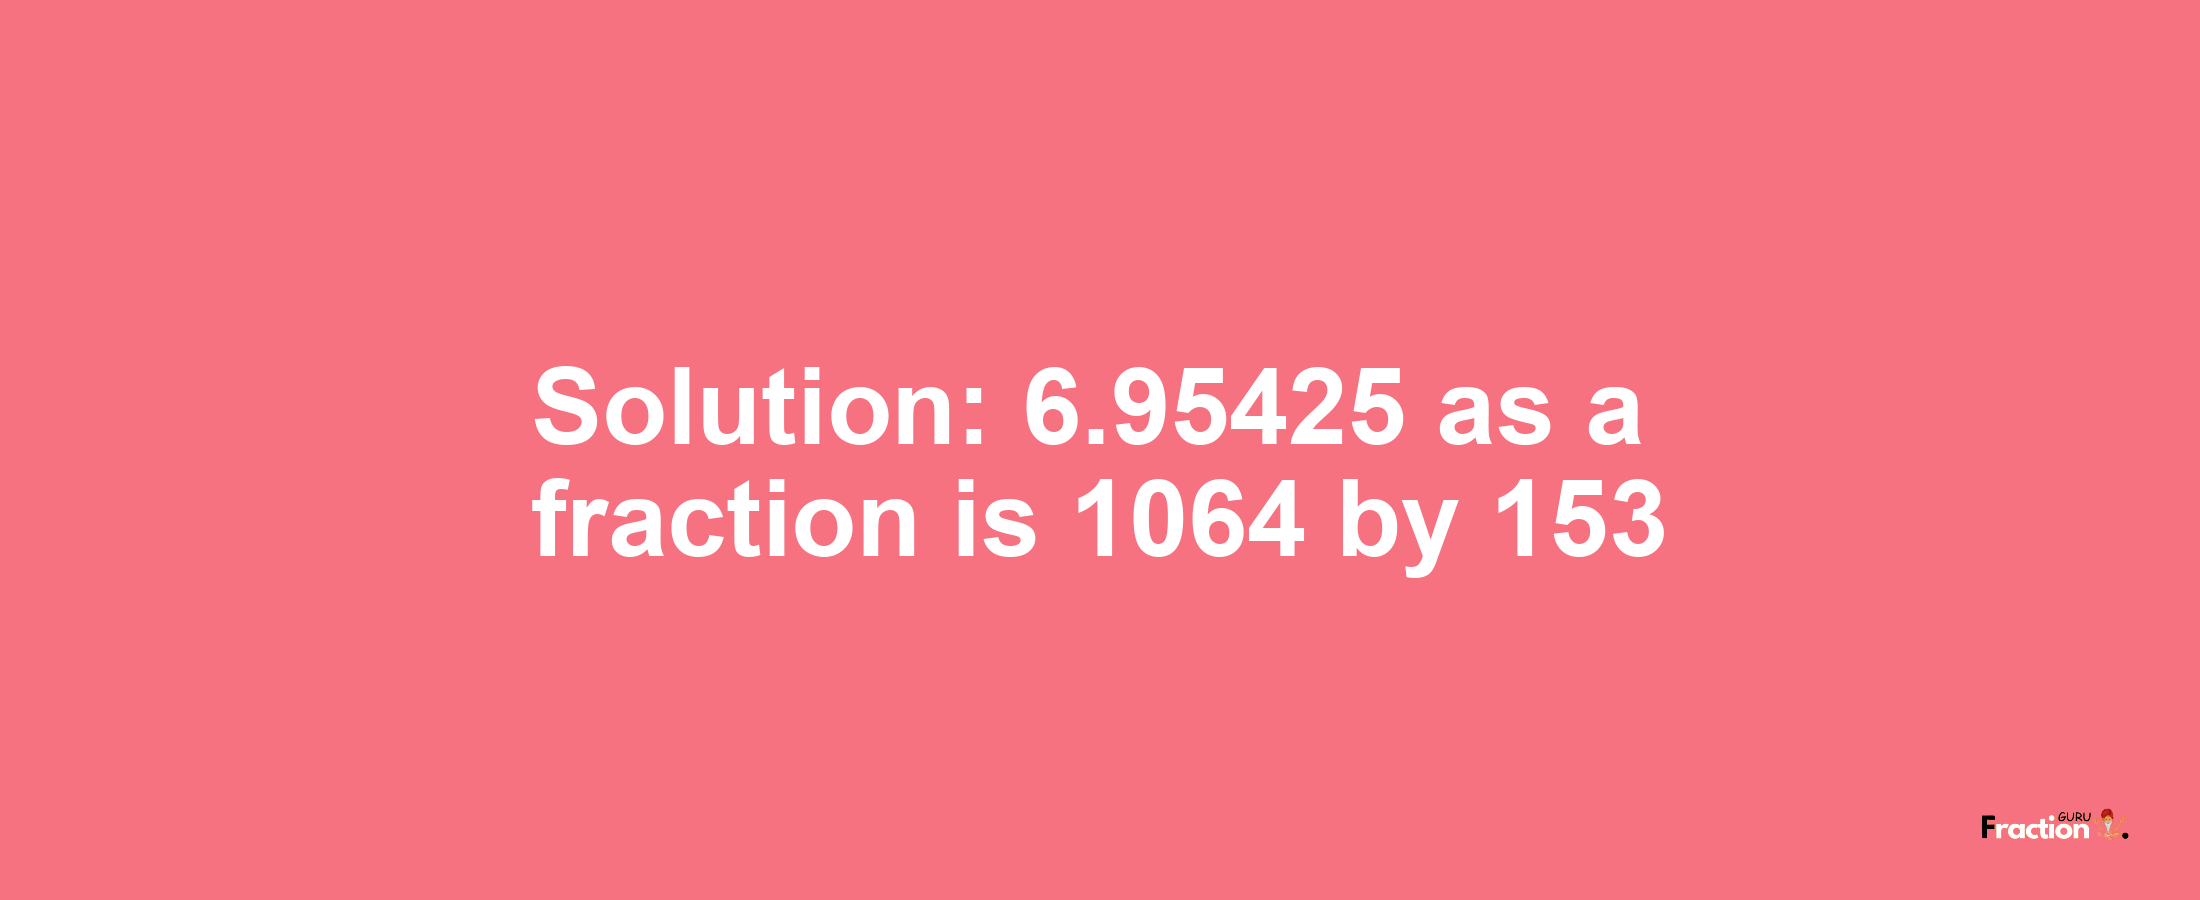 Solution:6.95425 as a fraction is 1064/153